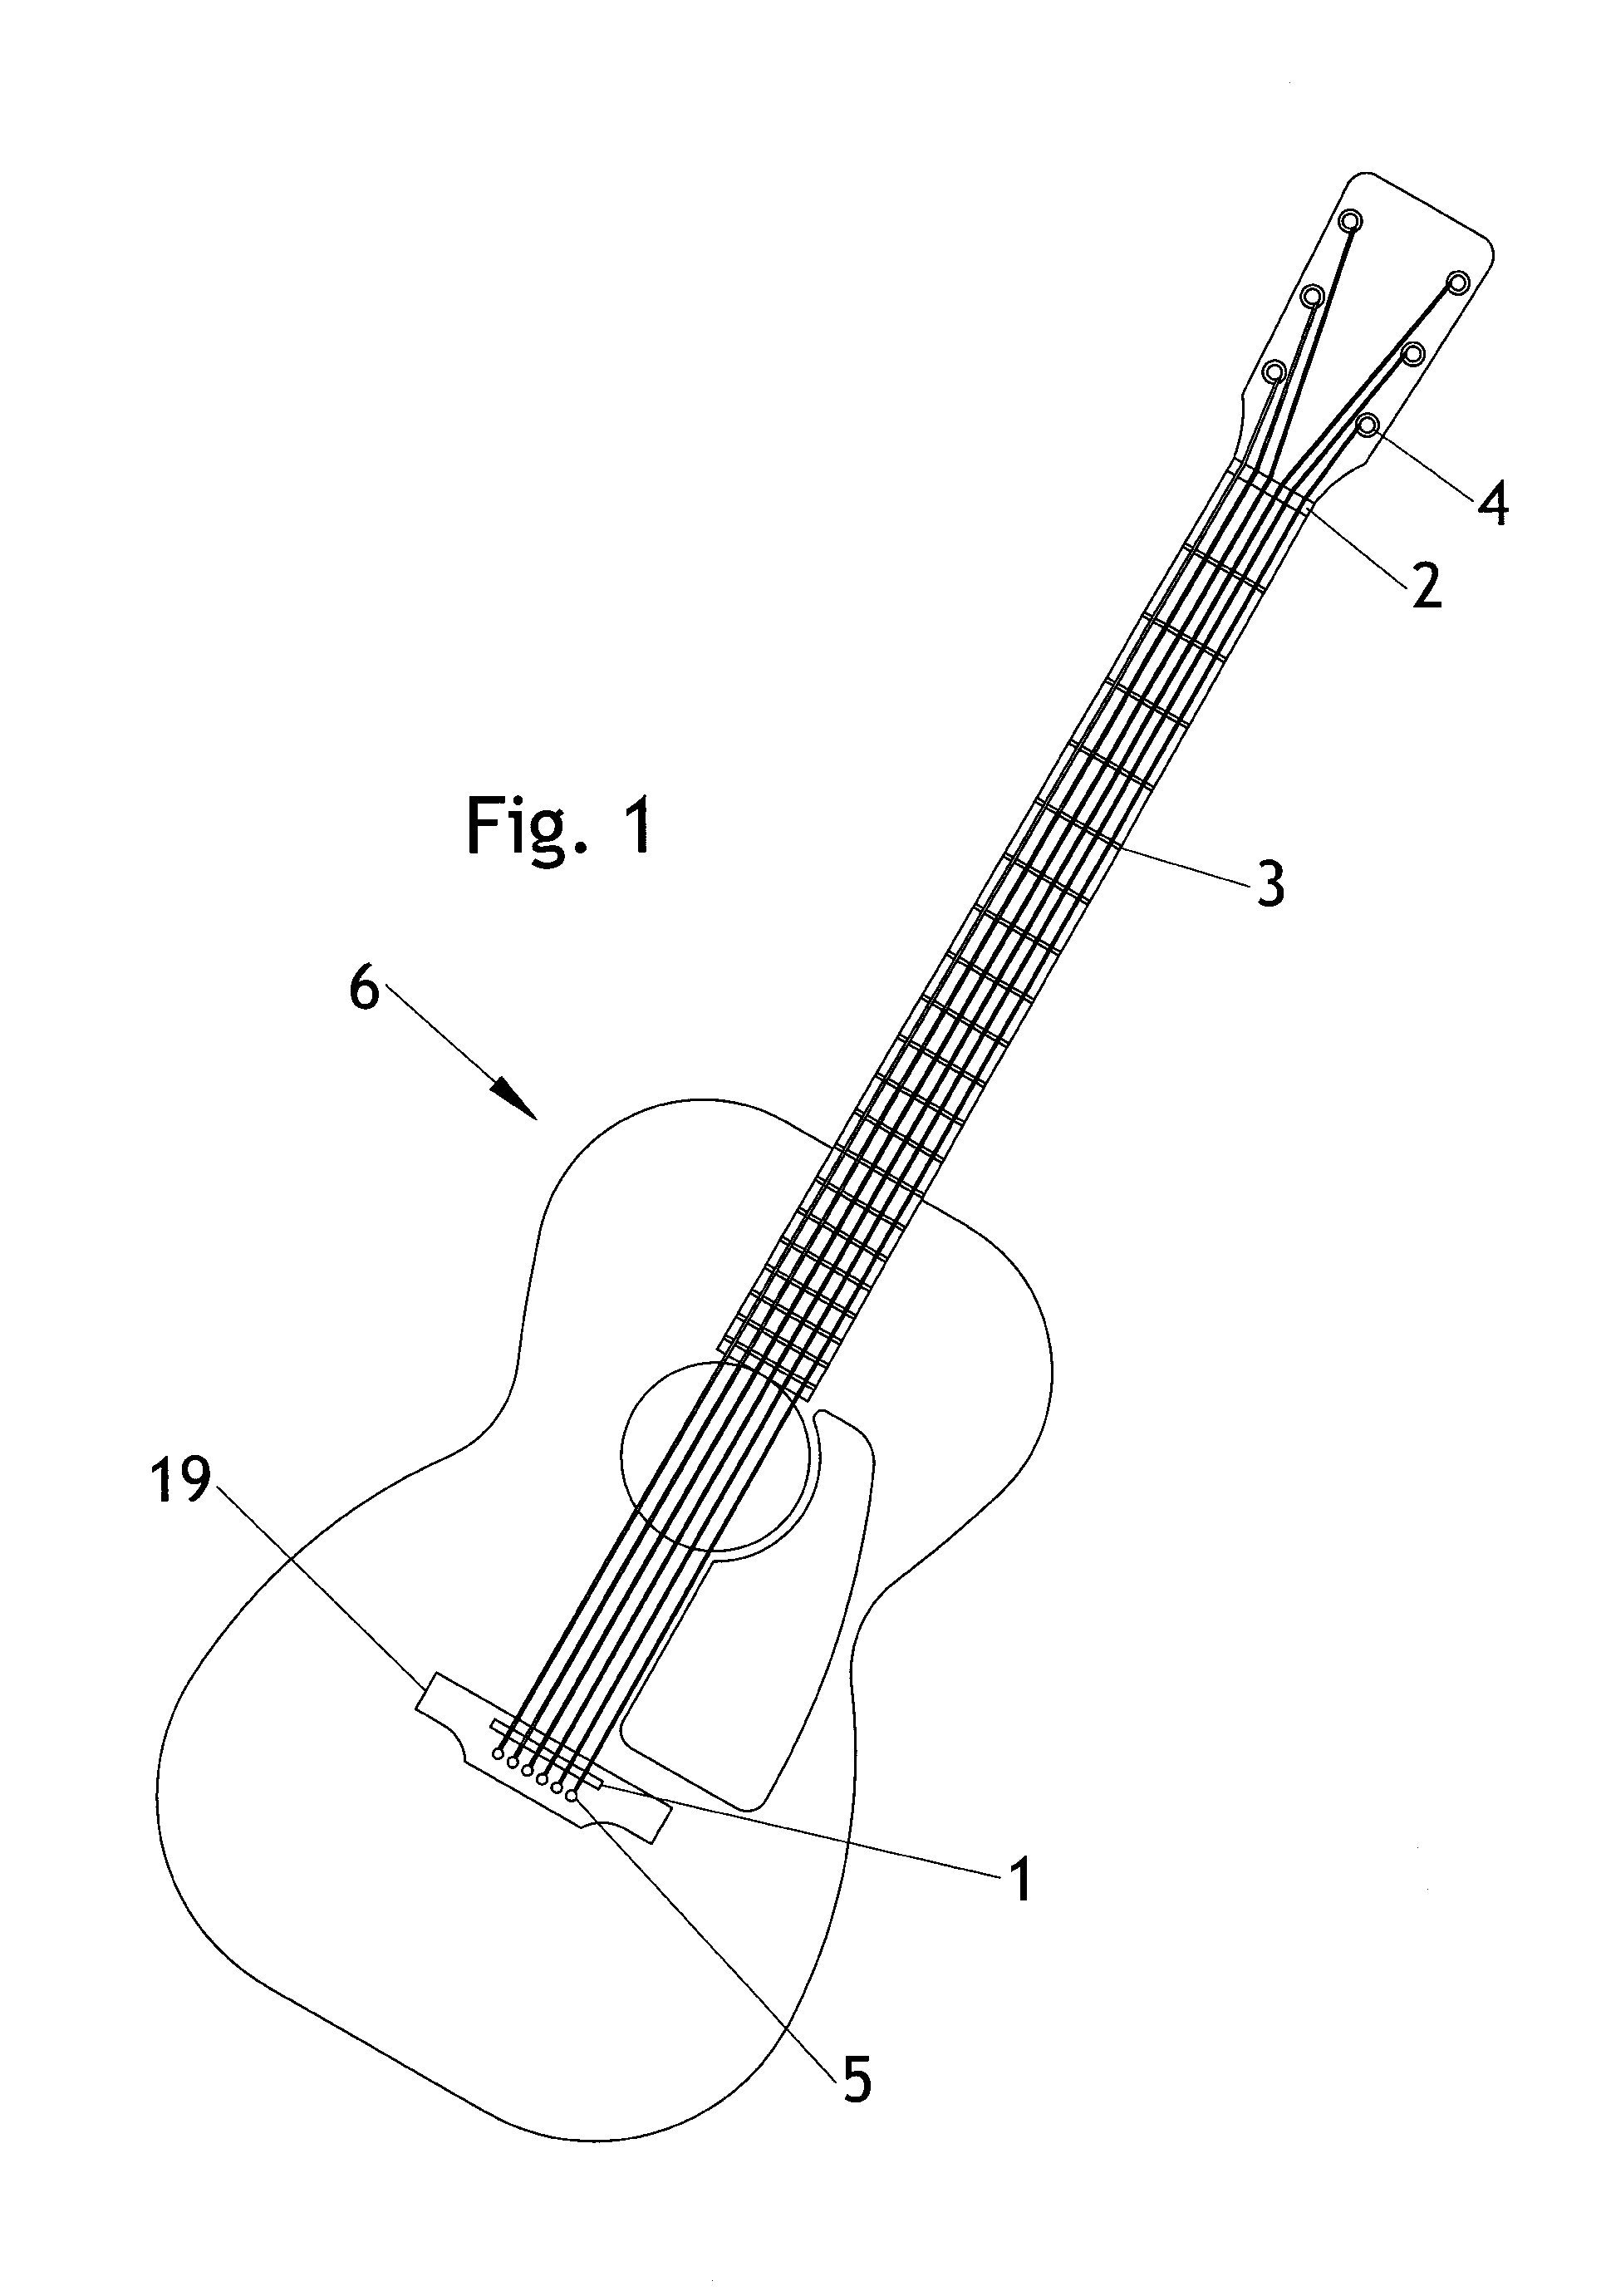 Pyrolytic carbon components for stringed instruments